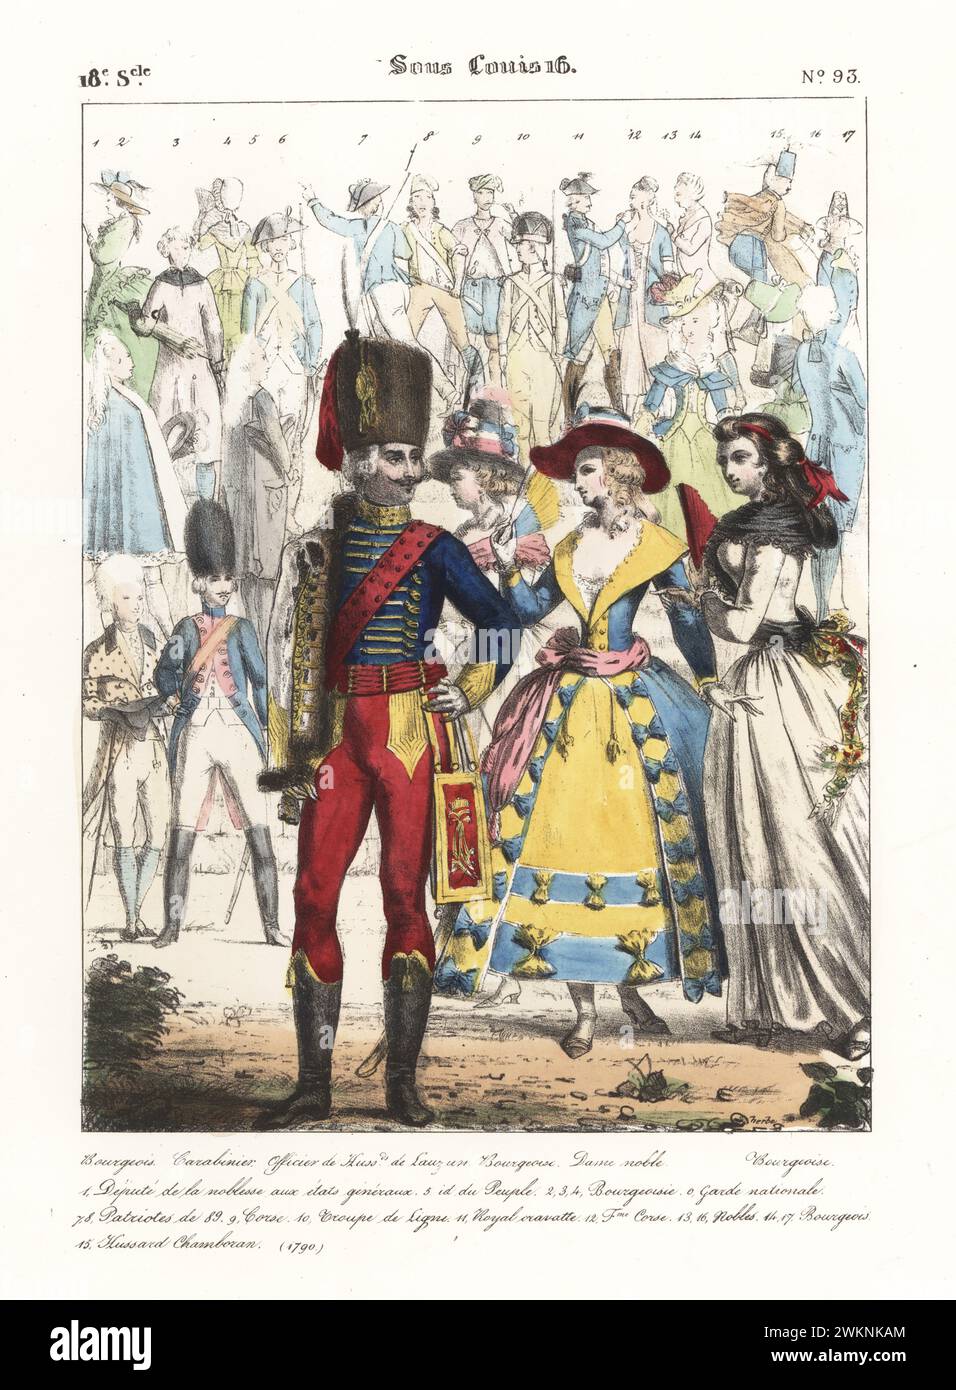 Officer of the French 5th Hussars with women, 18th century. Lauzun's Hussars officer in bearskin, pelisse, breeches and boots. Bourgeois woman in bonnet, dress with petticoats and riboons. Bourgeoise, Carabinier, Officier de Hussards de Lauzun, Bourgeois, Dame noble. Sous Louis 16. Handcoloured lithograph by Godard after an illustration by Charles Auguste Herbé from his own Costumes Francais, Civils, Militaires et Religieux, French Costumes, Civil, Military and Religious, Maison Martinet, Paris, 1837. Stock Photo